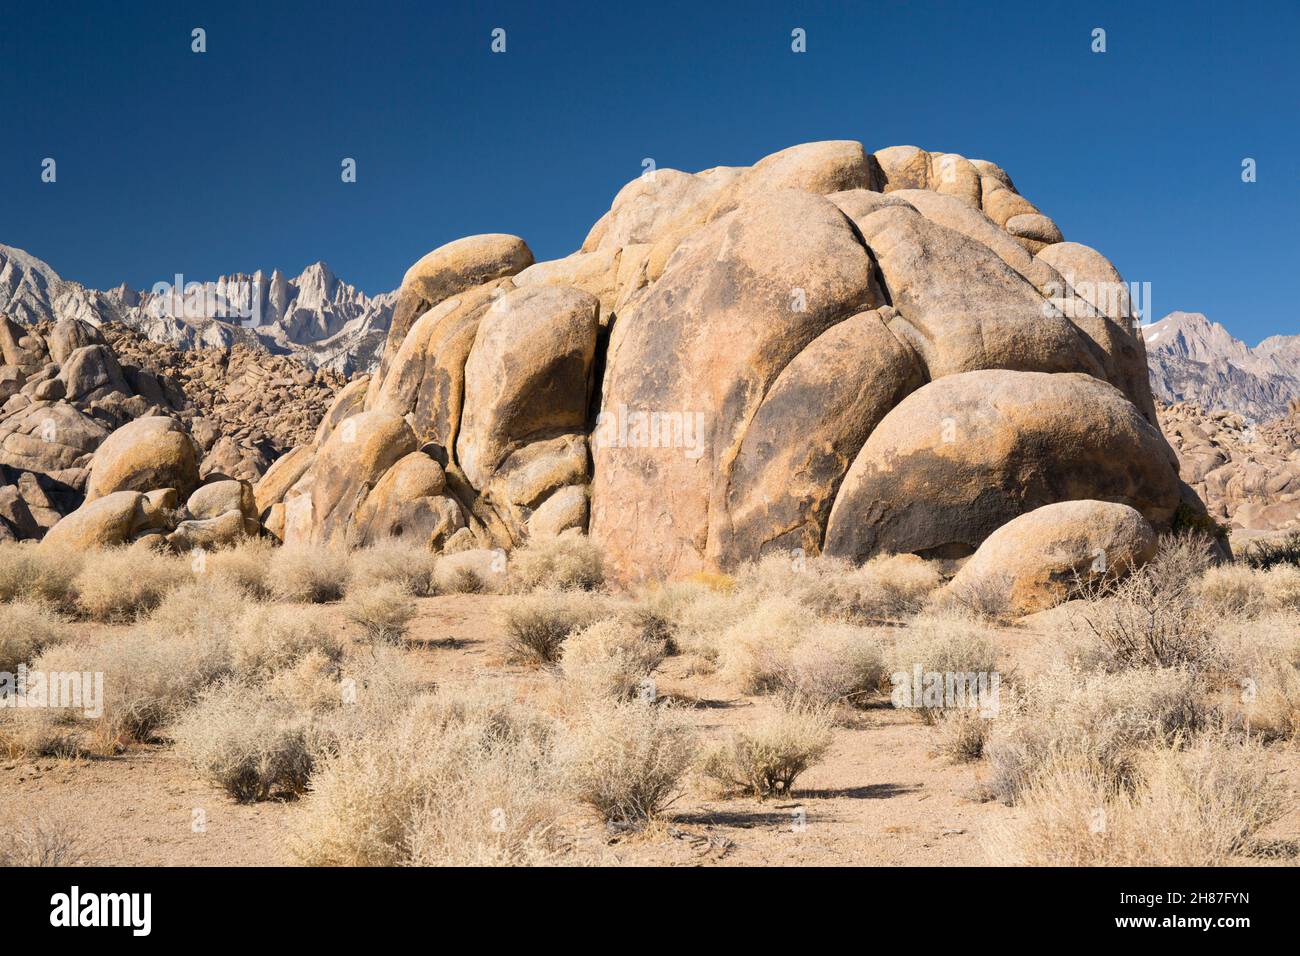 Alabama Hills National Scenic Area, Lone Pine, California, USA. Huge granite boulders in arid desert landscape, Mount Whitney visible in background. Stock Photo